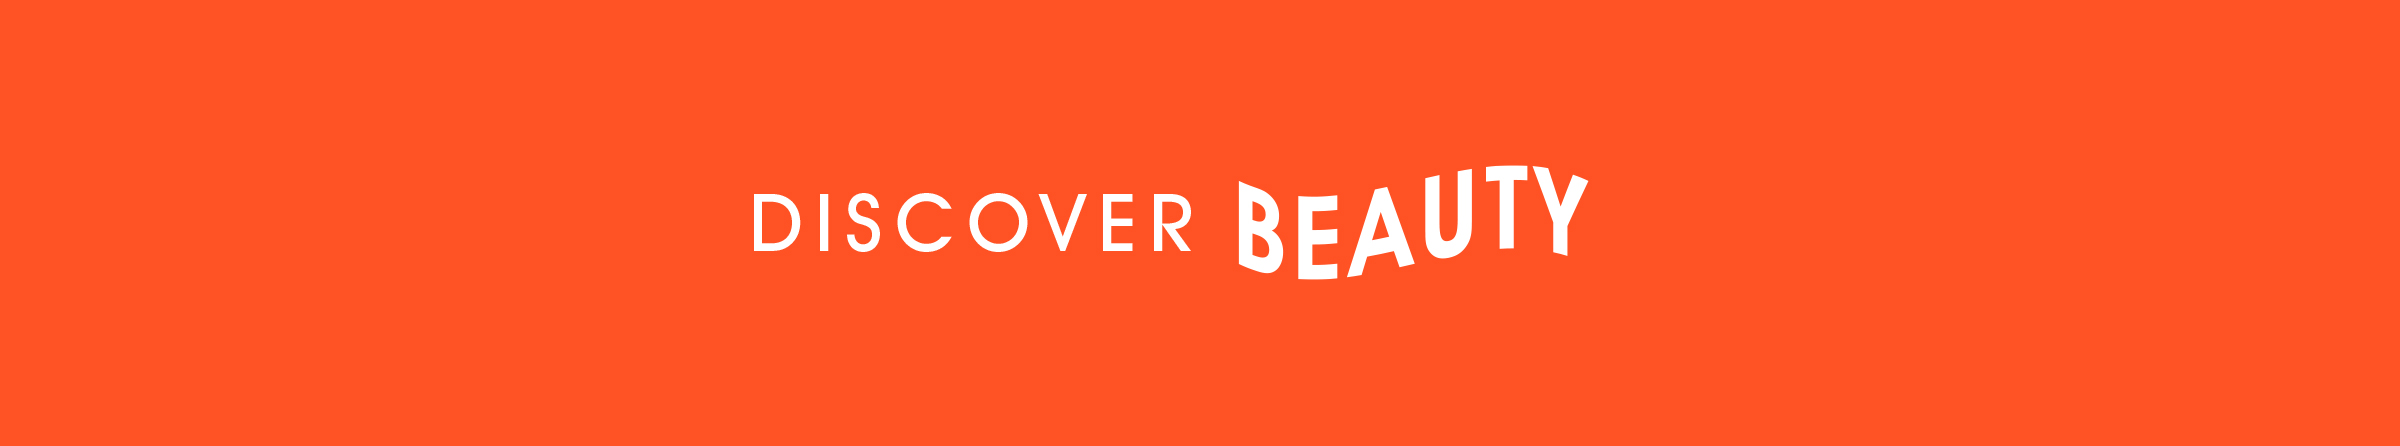 discover-beauty-banner